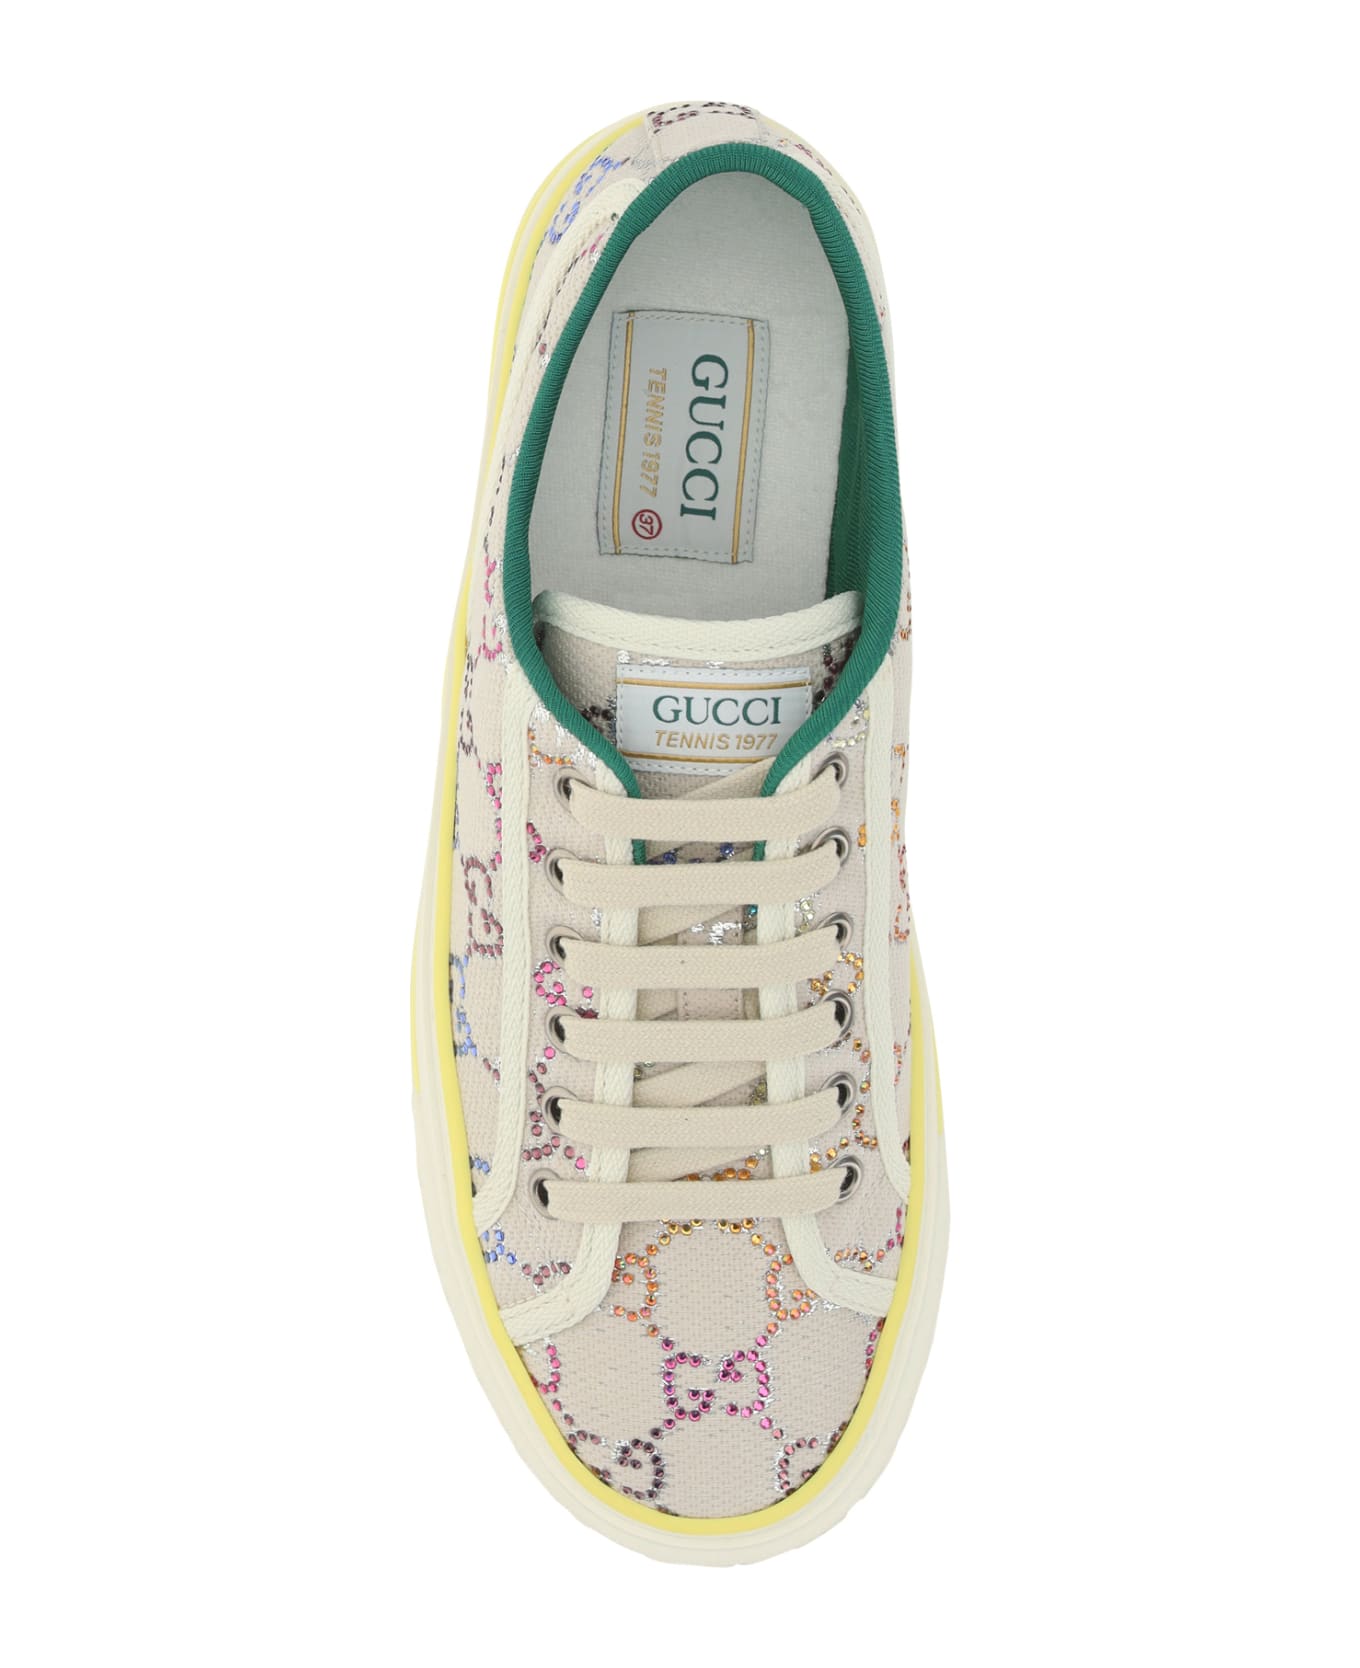 Gucci Sneakers - Silver/white スニーカー